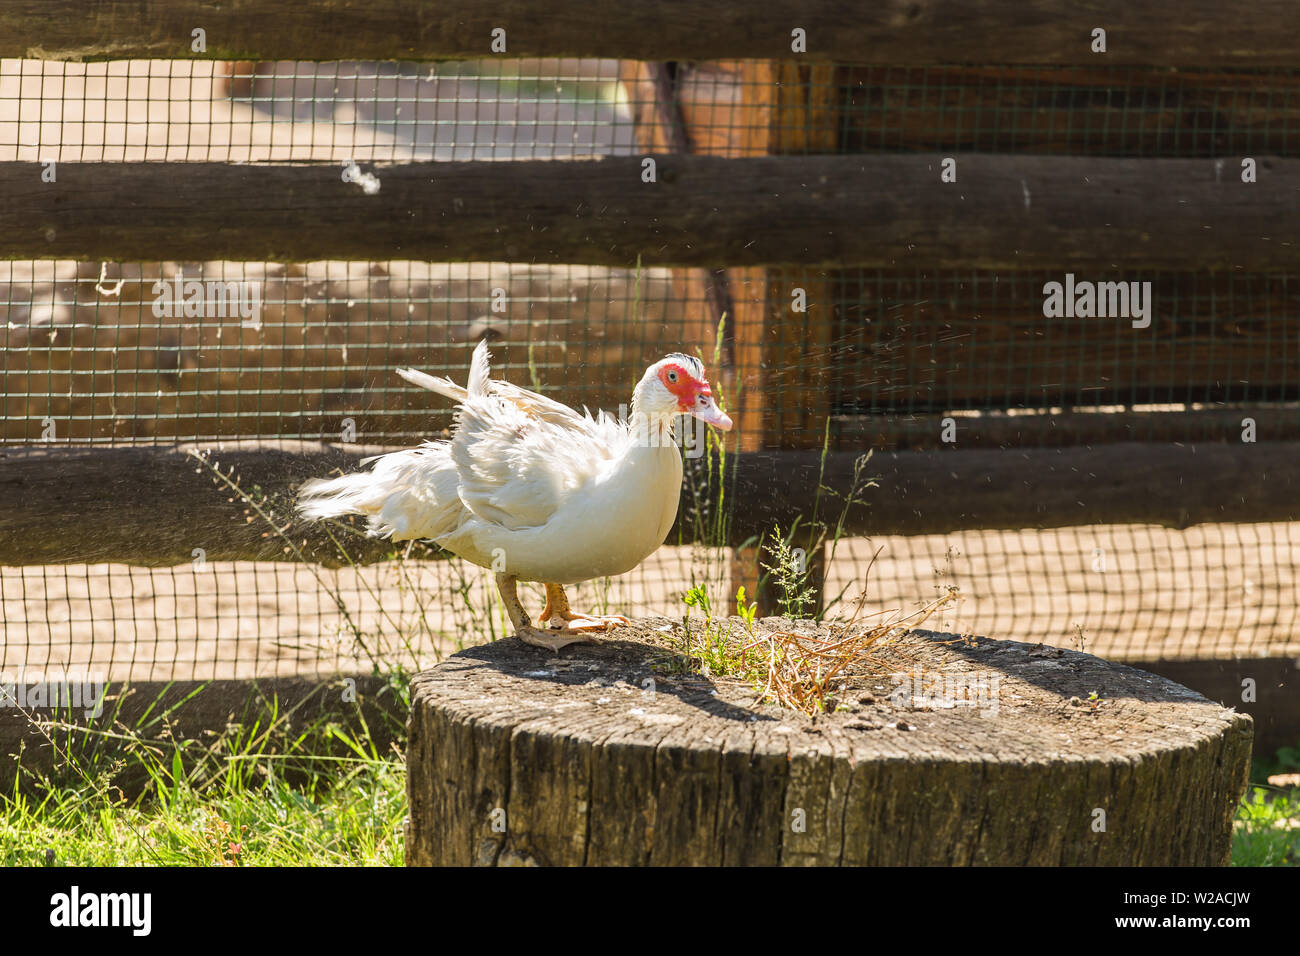 Wild goose. The concept of animal life in the farm Stock Photo